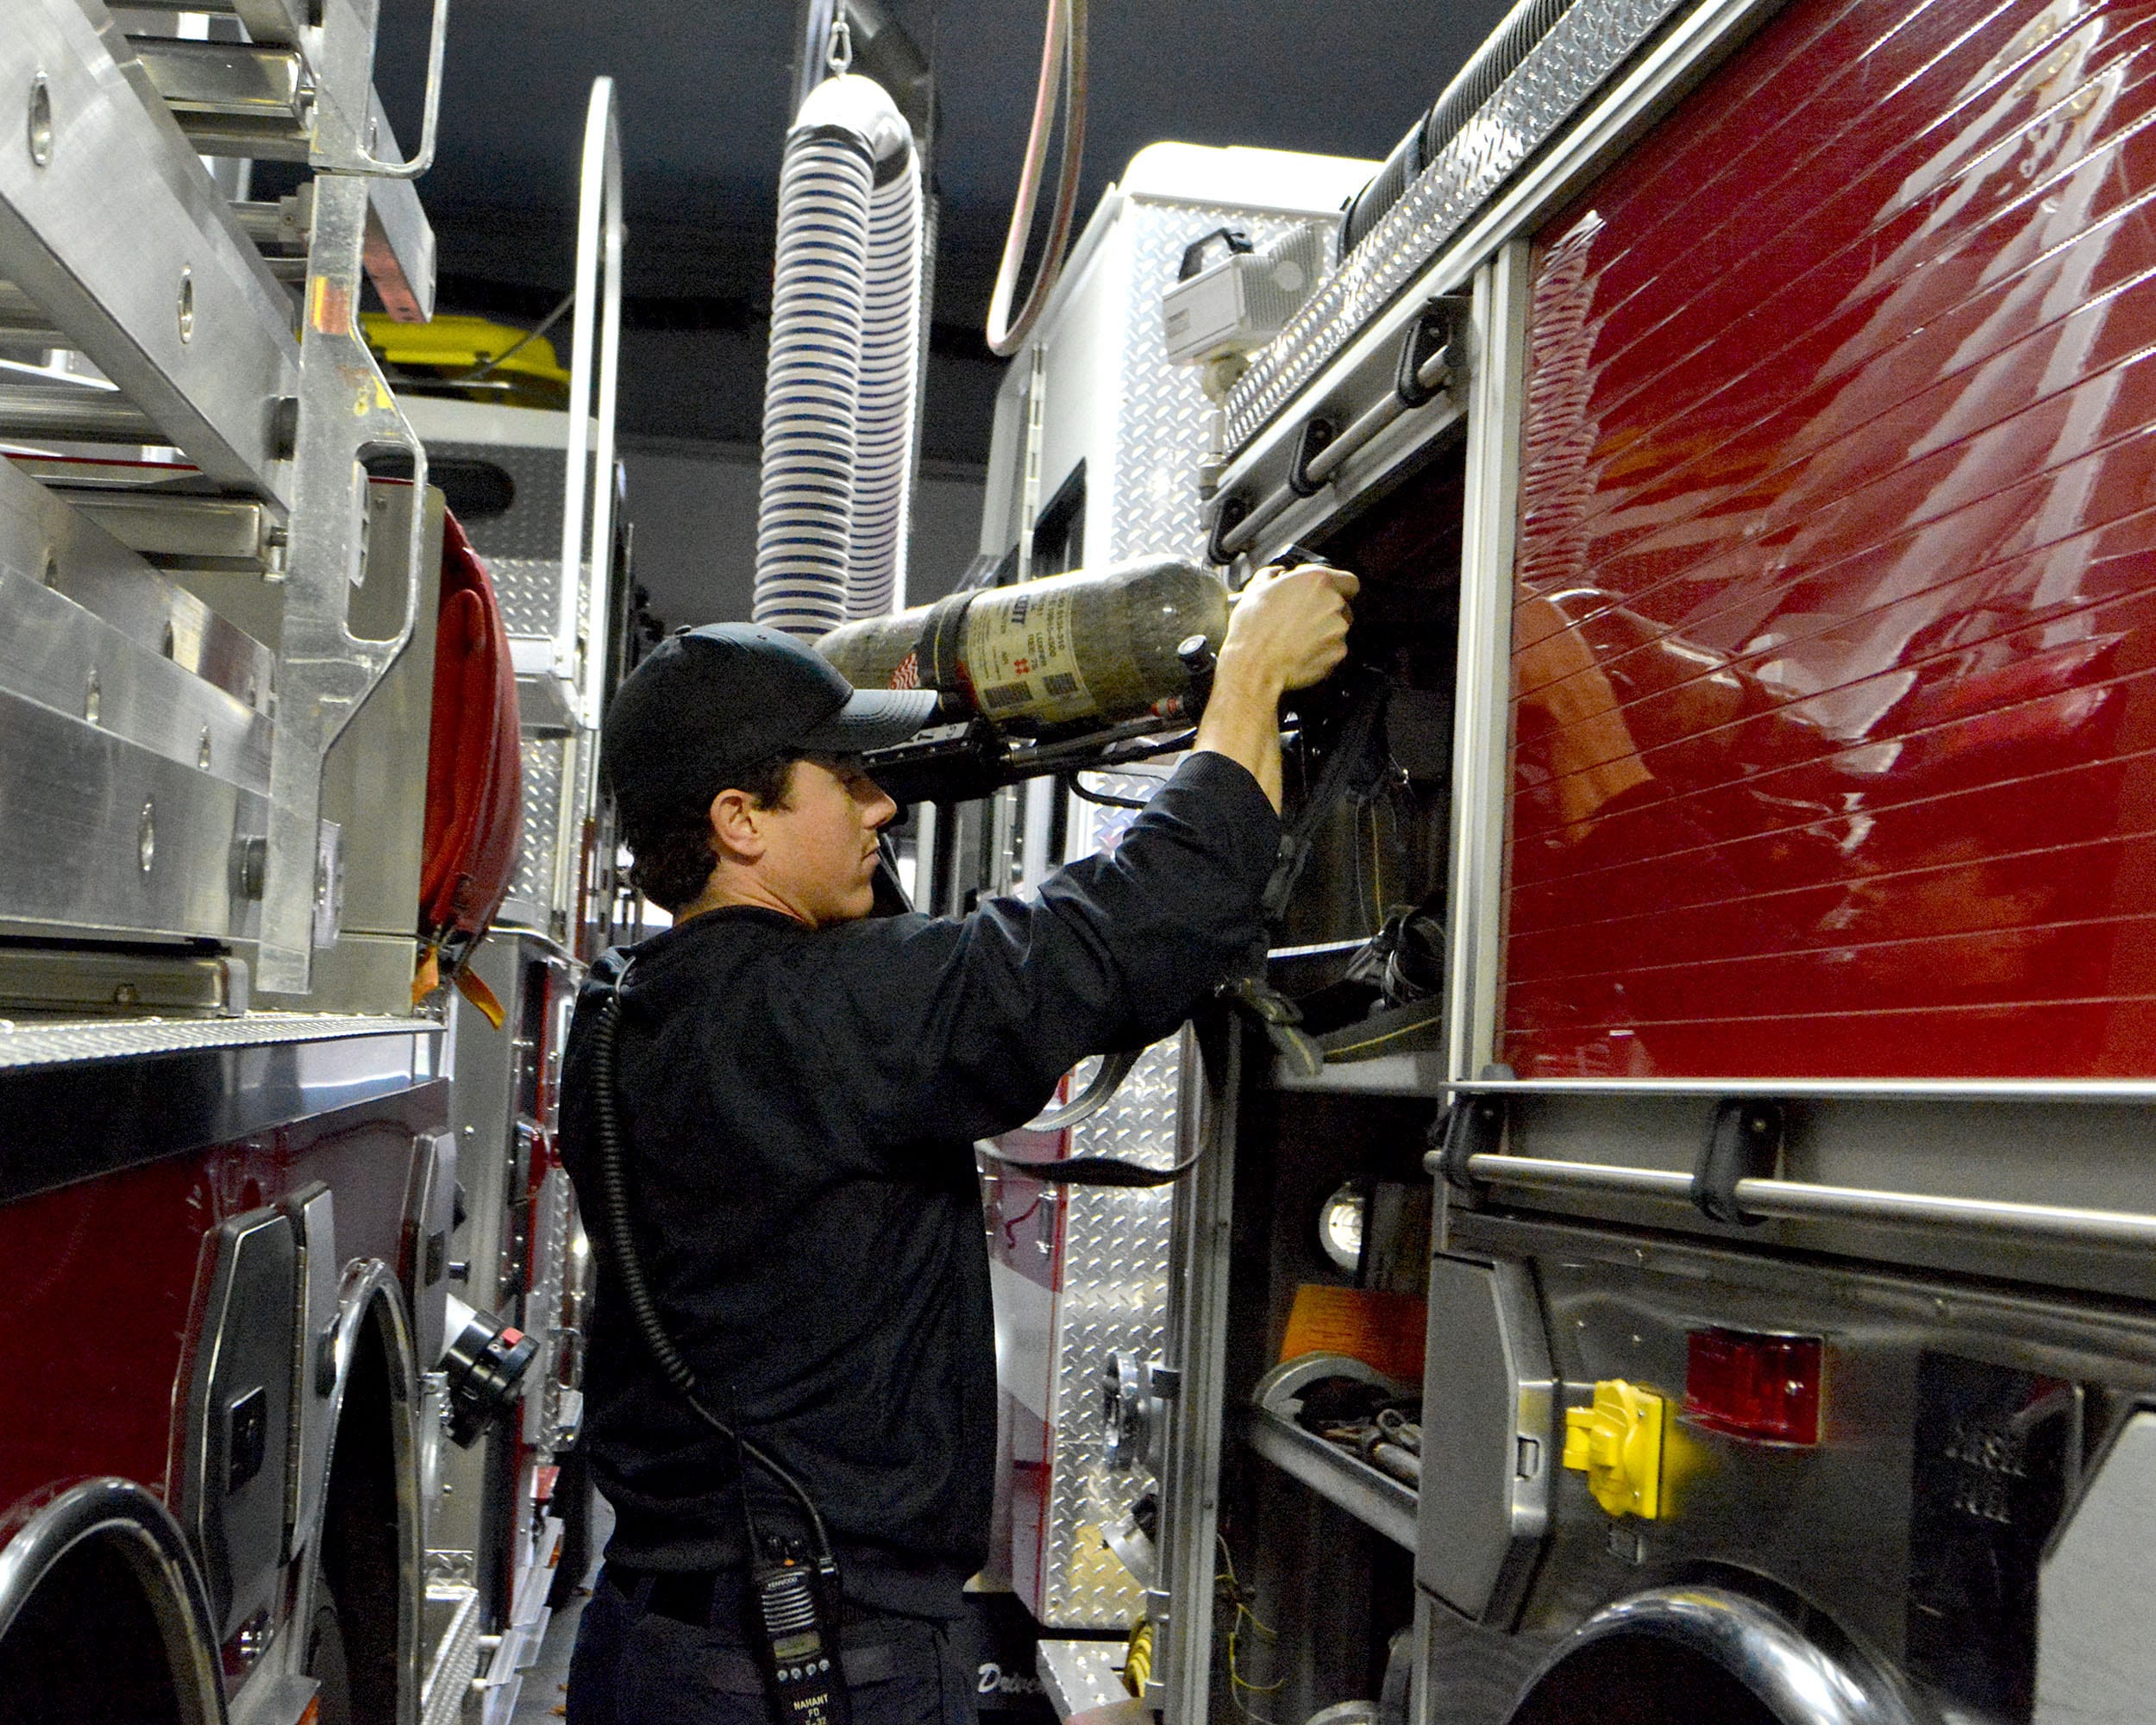 Nahant. Fire Station. Jon Tibbo, Nahant Fire Fighter goes through the daily check of Engine 31.